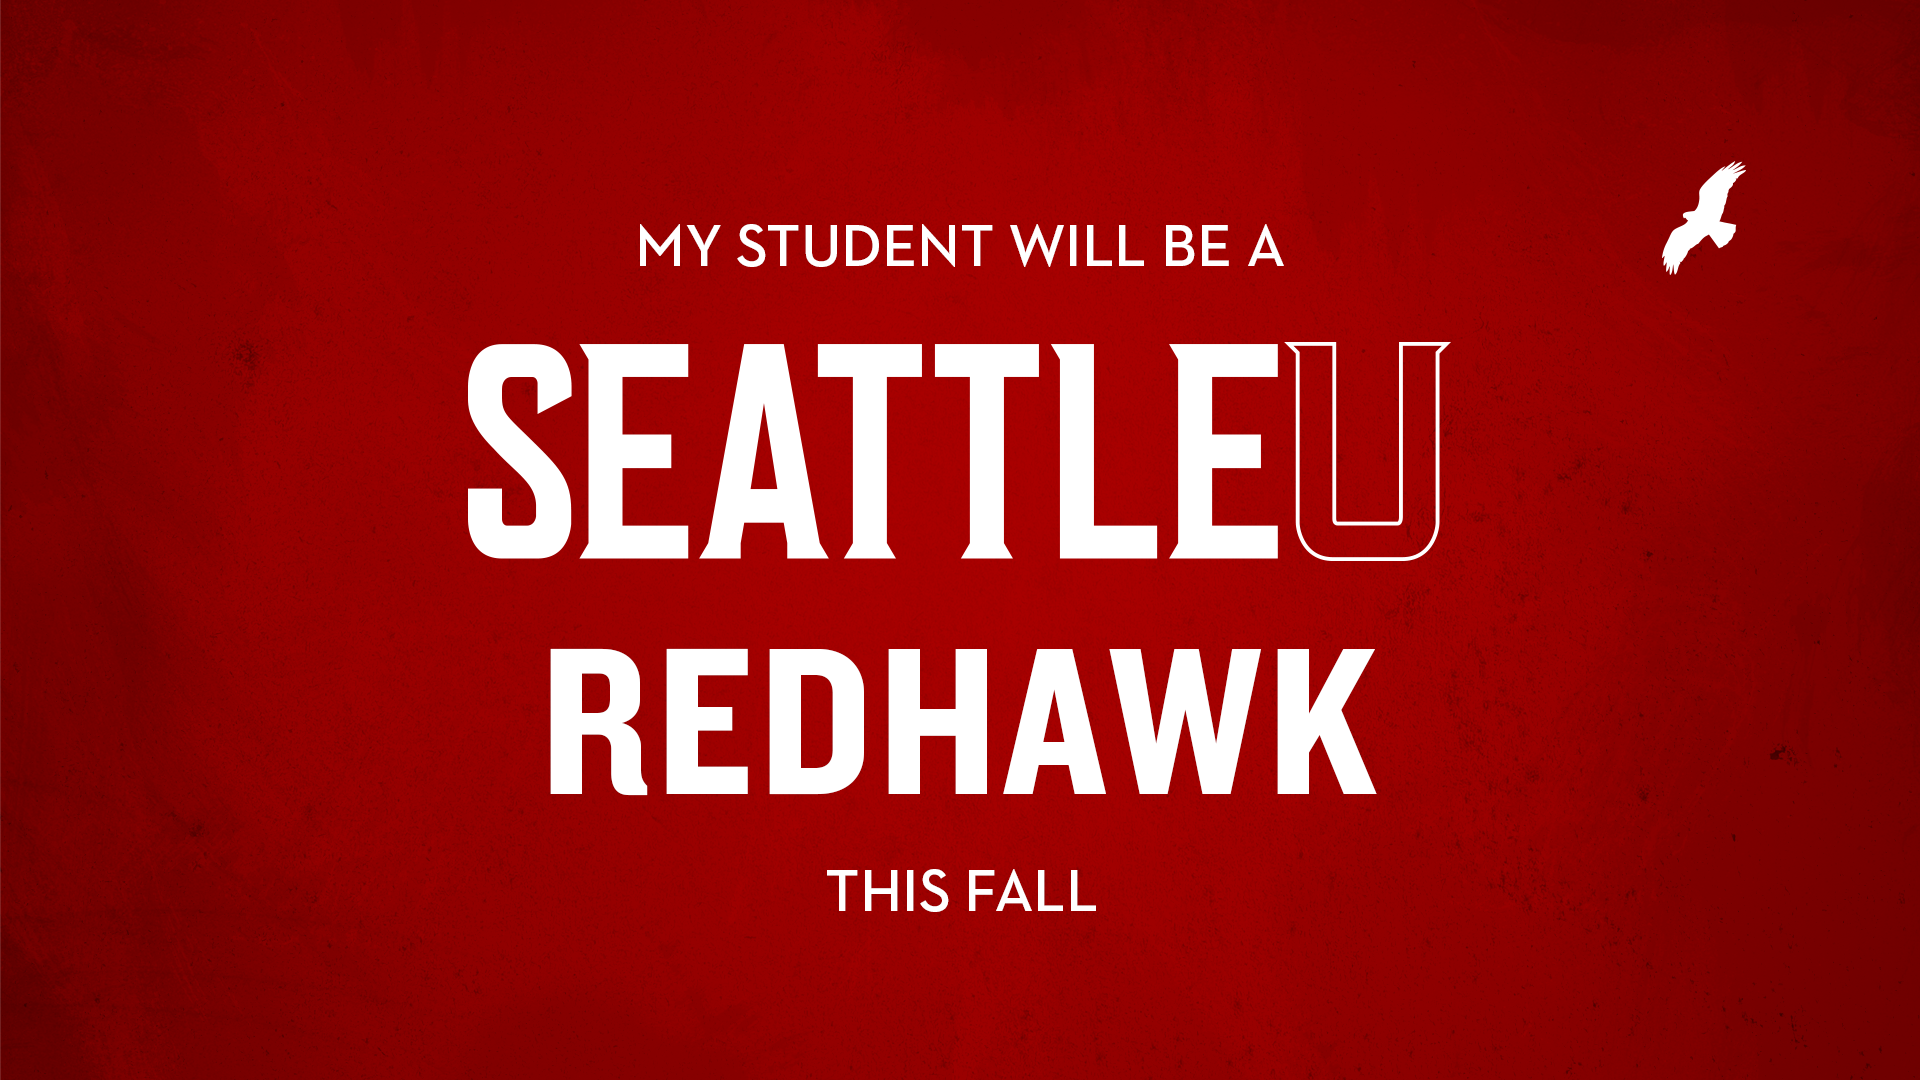 My Student will be a Redhawk